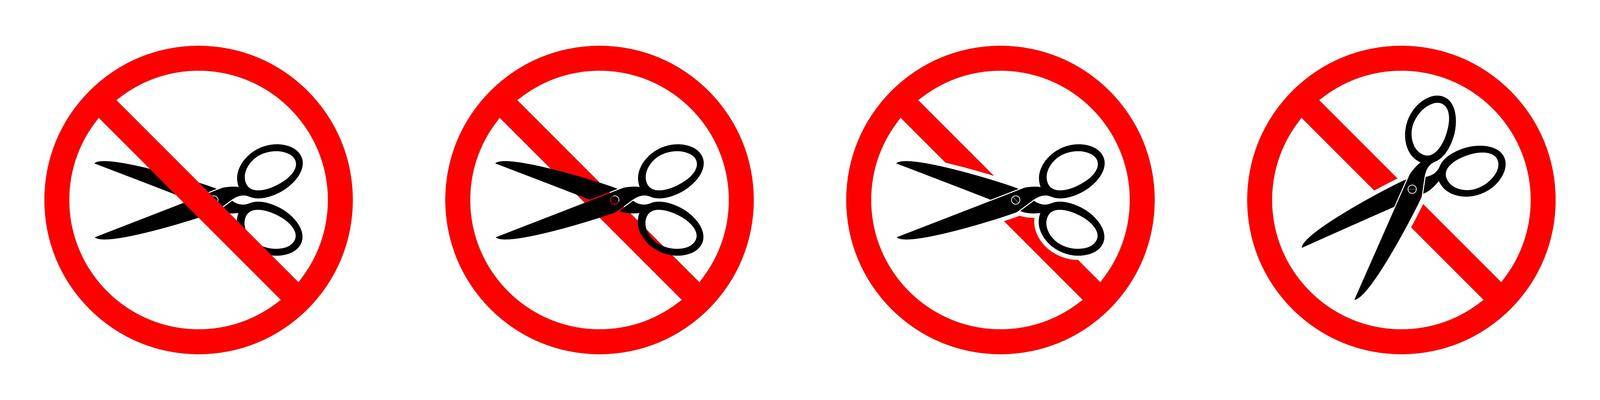 Stop or ban red round sign with scissors icon. Vector illustration. Forbidden signs set. Scissors is prohibited